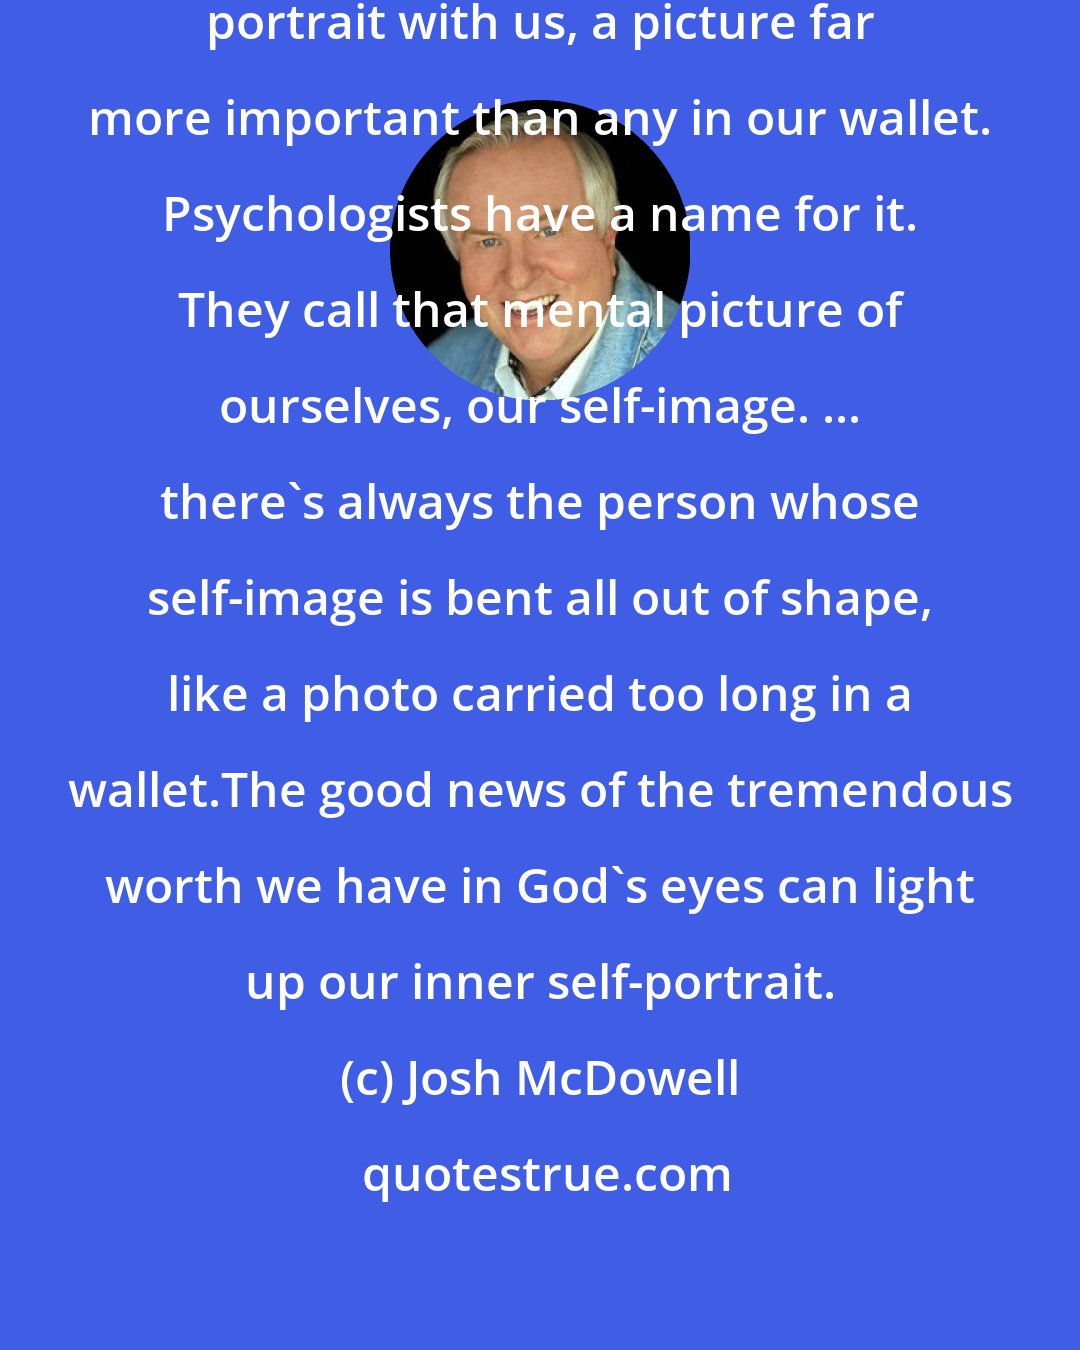 Josh McDowell: Yet each of us also carries another portrait with us, a picture far more important than any in our wallet. Psychologists have a name for it. They call that mental picture of ourselves, our self-image. ... there's always the person whose self-image is bent all out of shape, like a photo carried too long in a wallet.The good news of the tremendous worth we have in God's eyes can light up our inner self-portrait.